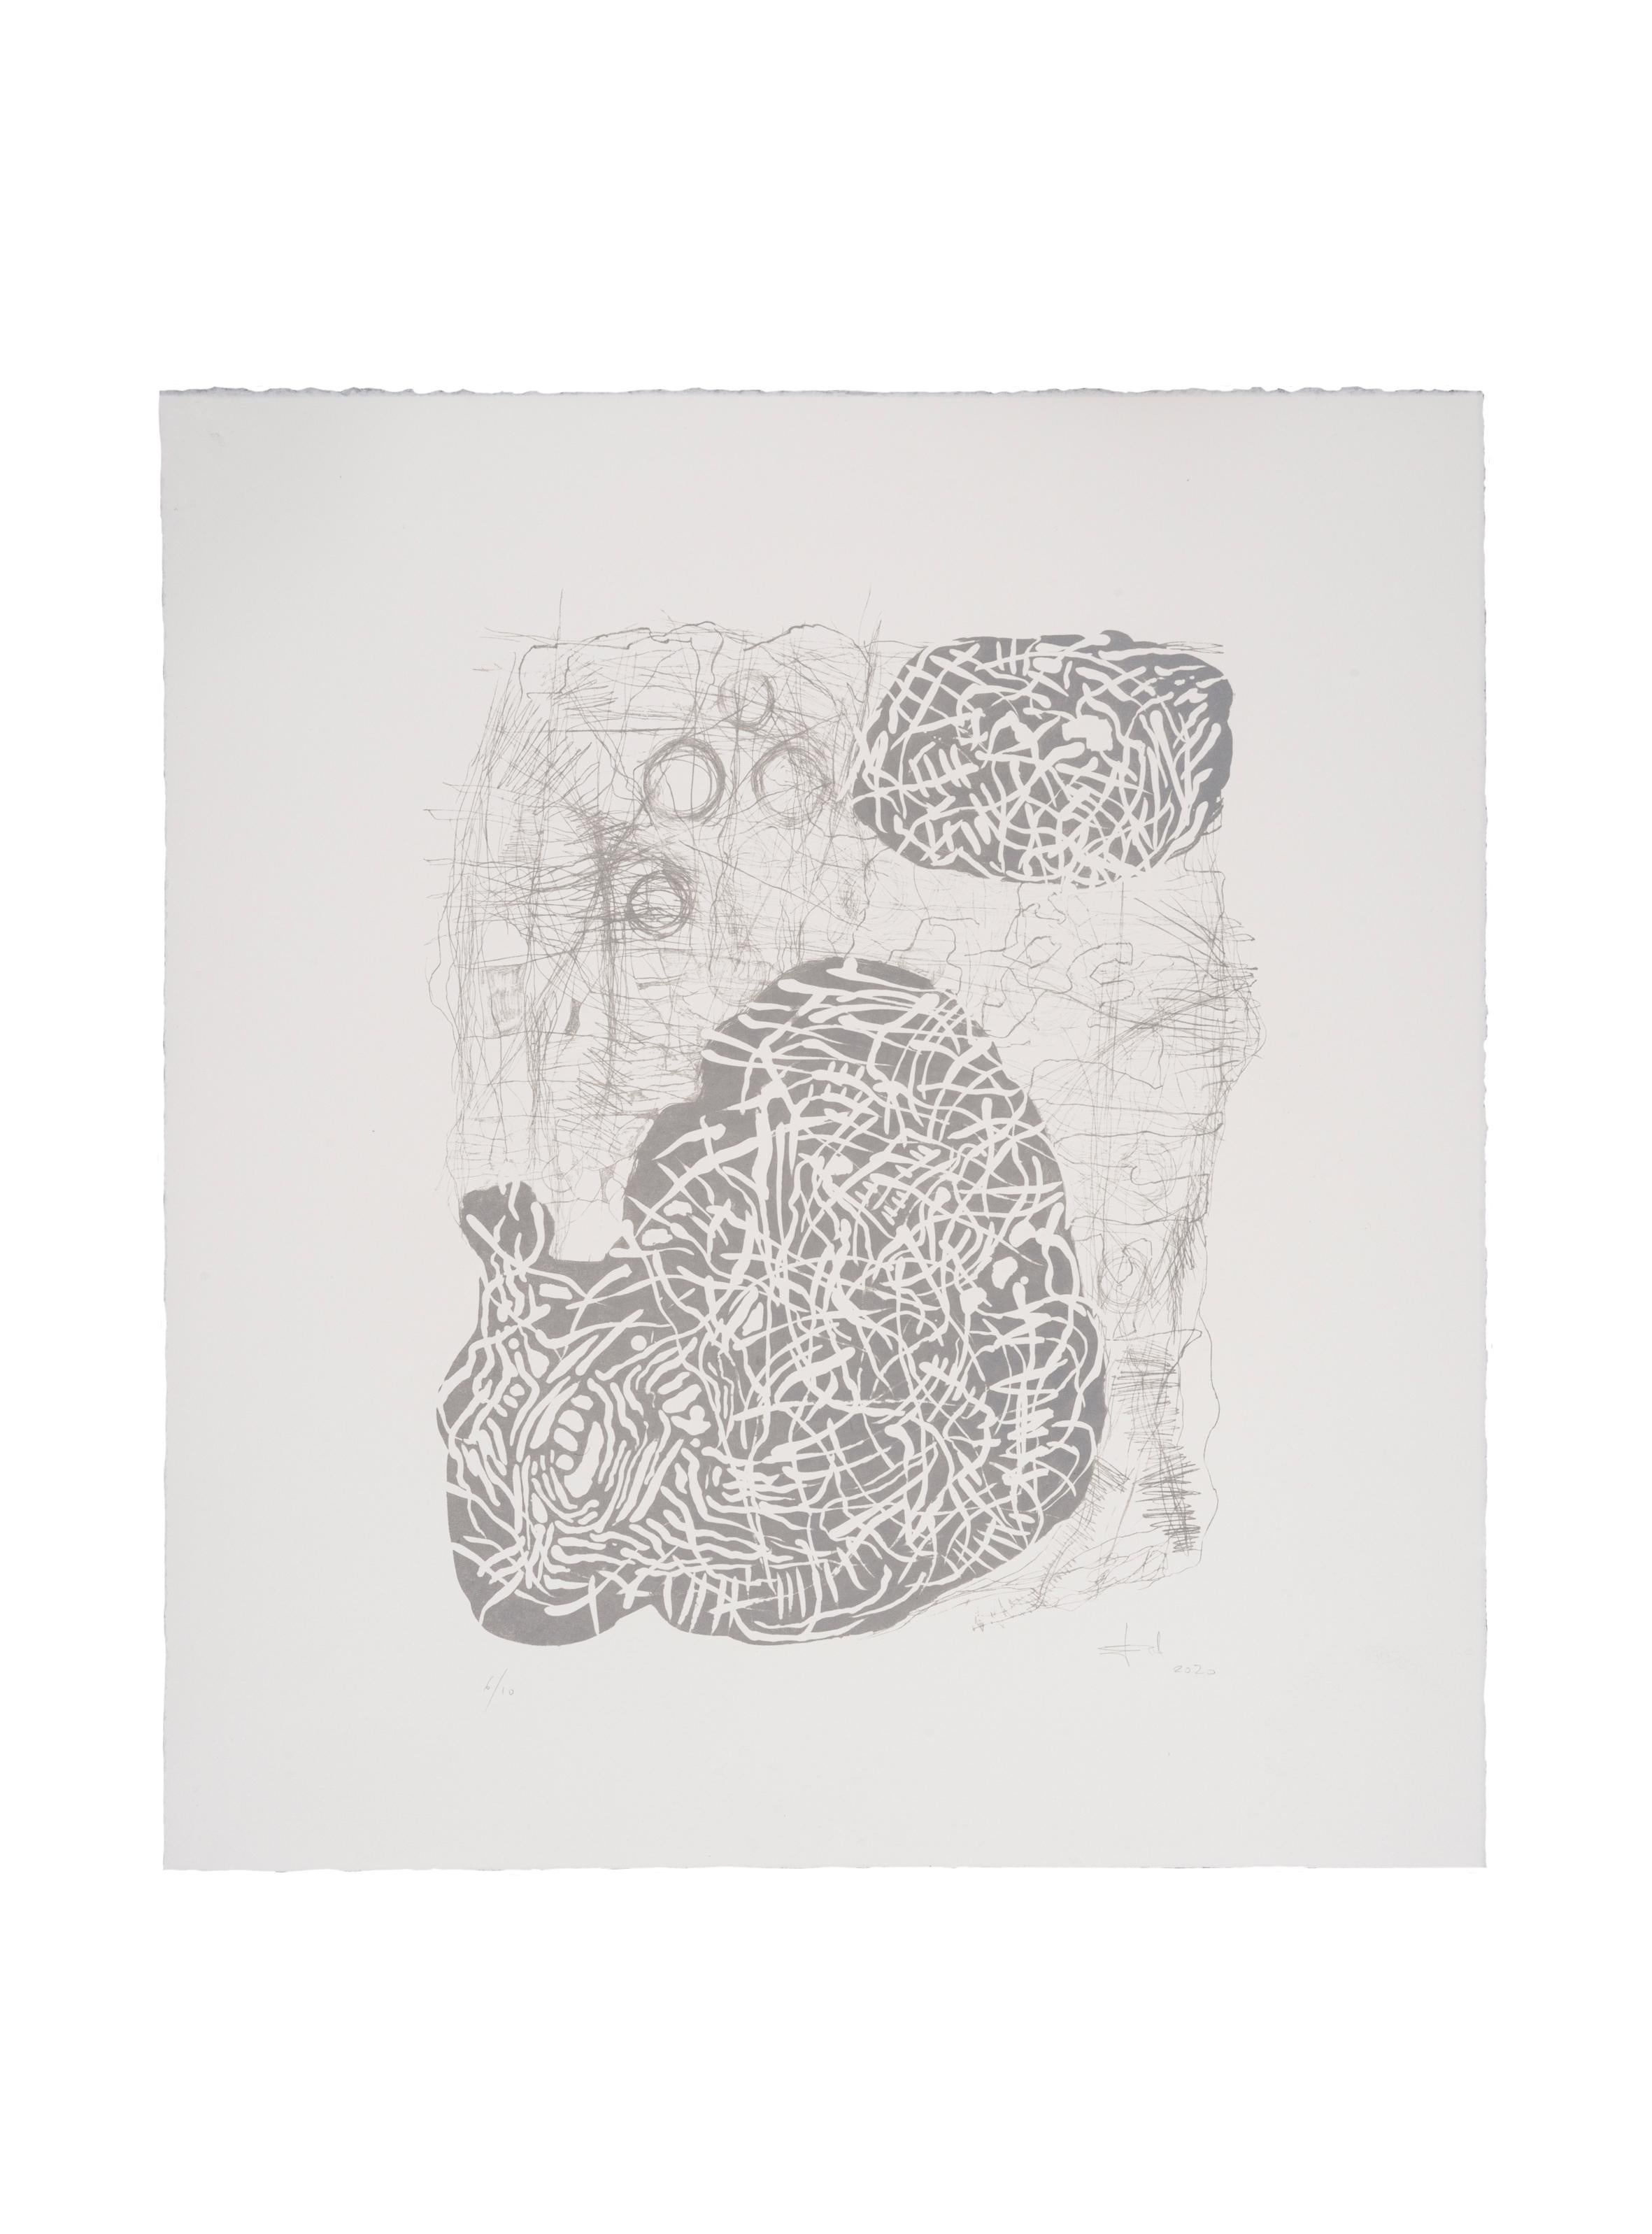 Lithography - DFK Rives paper, 270gr - 2021 - 600€
Ed. 6/10

